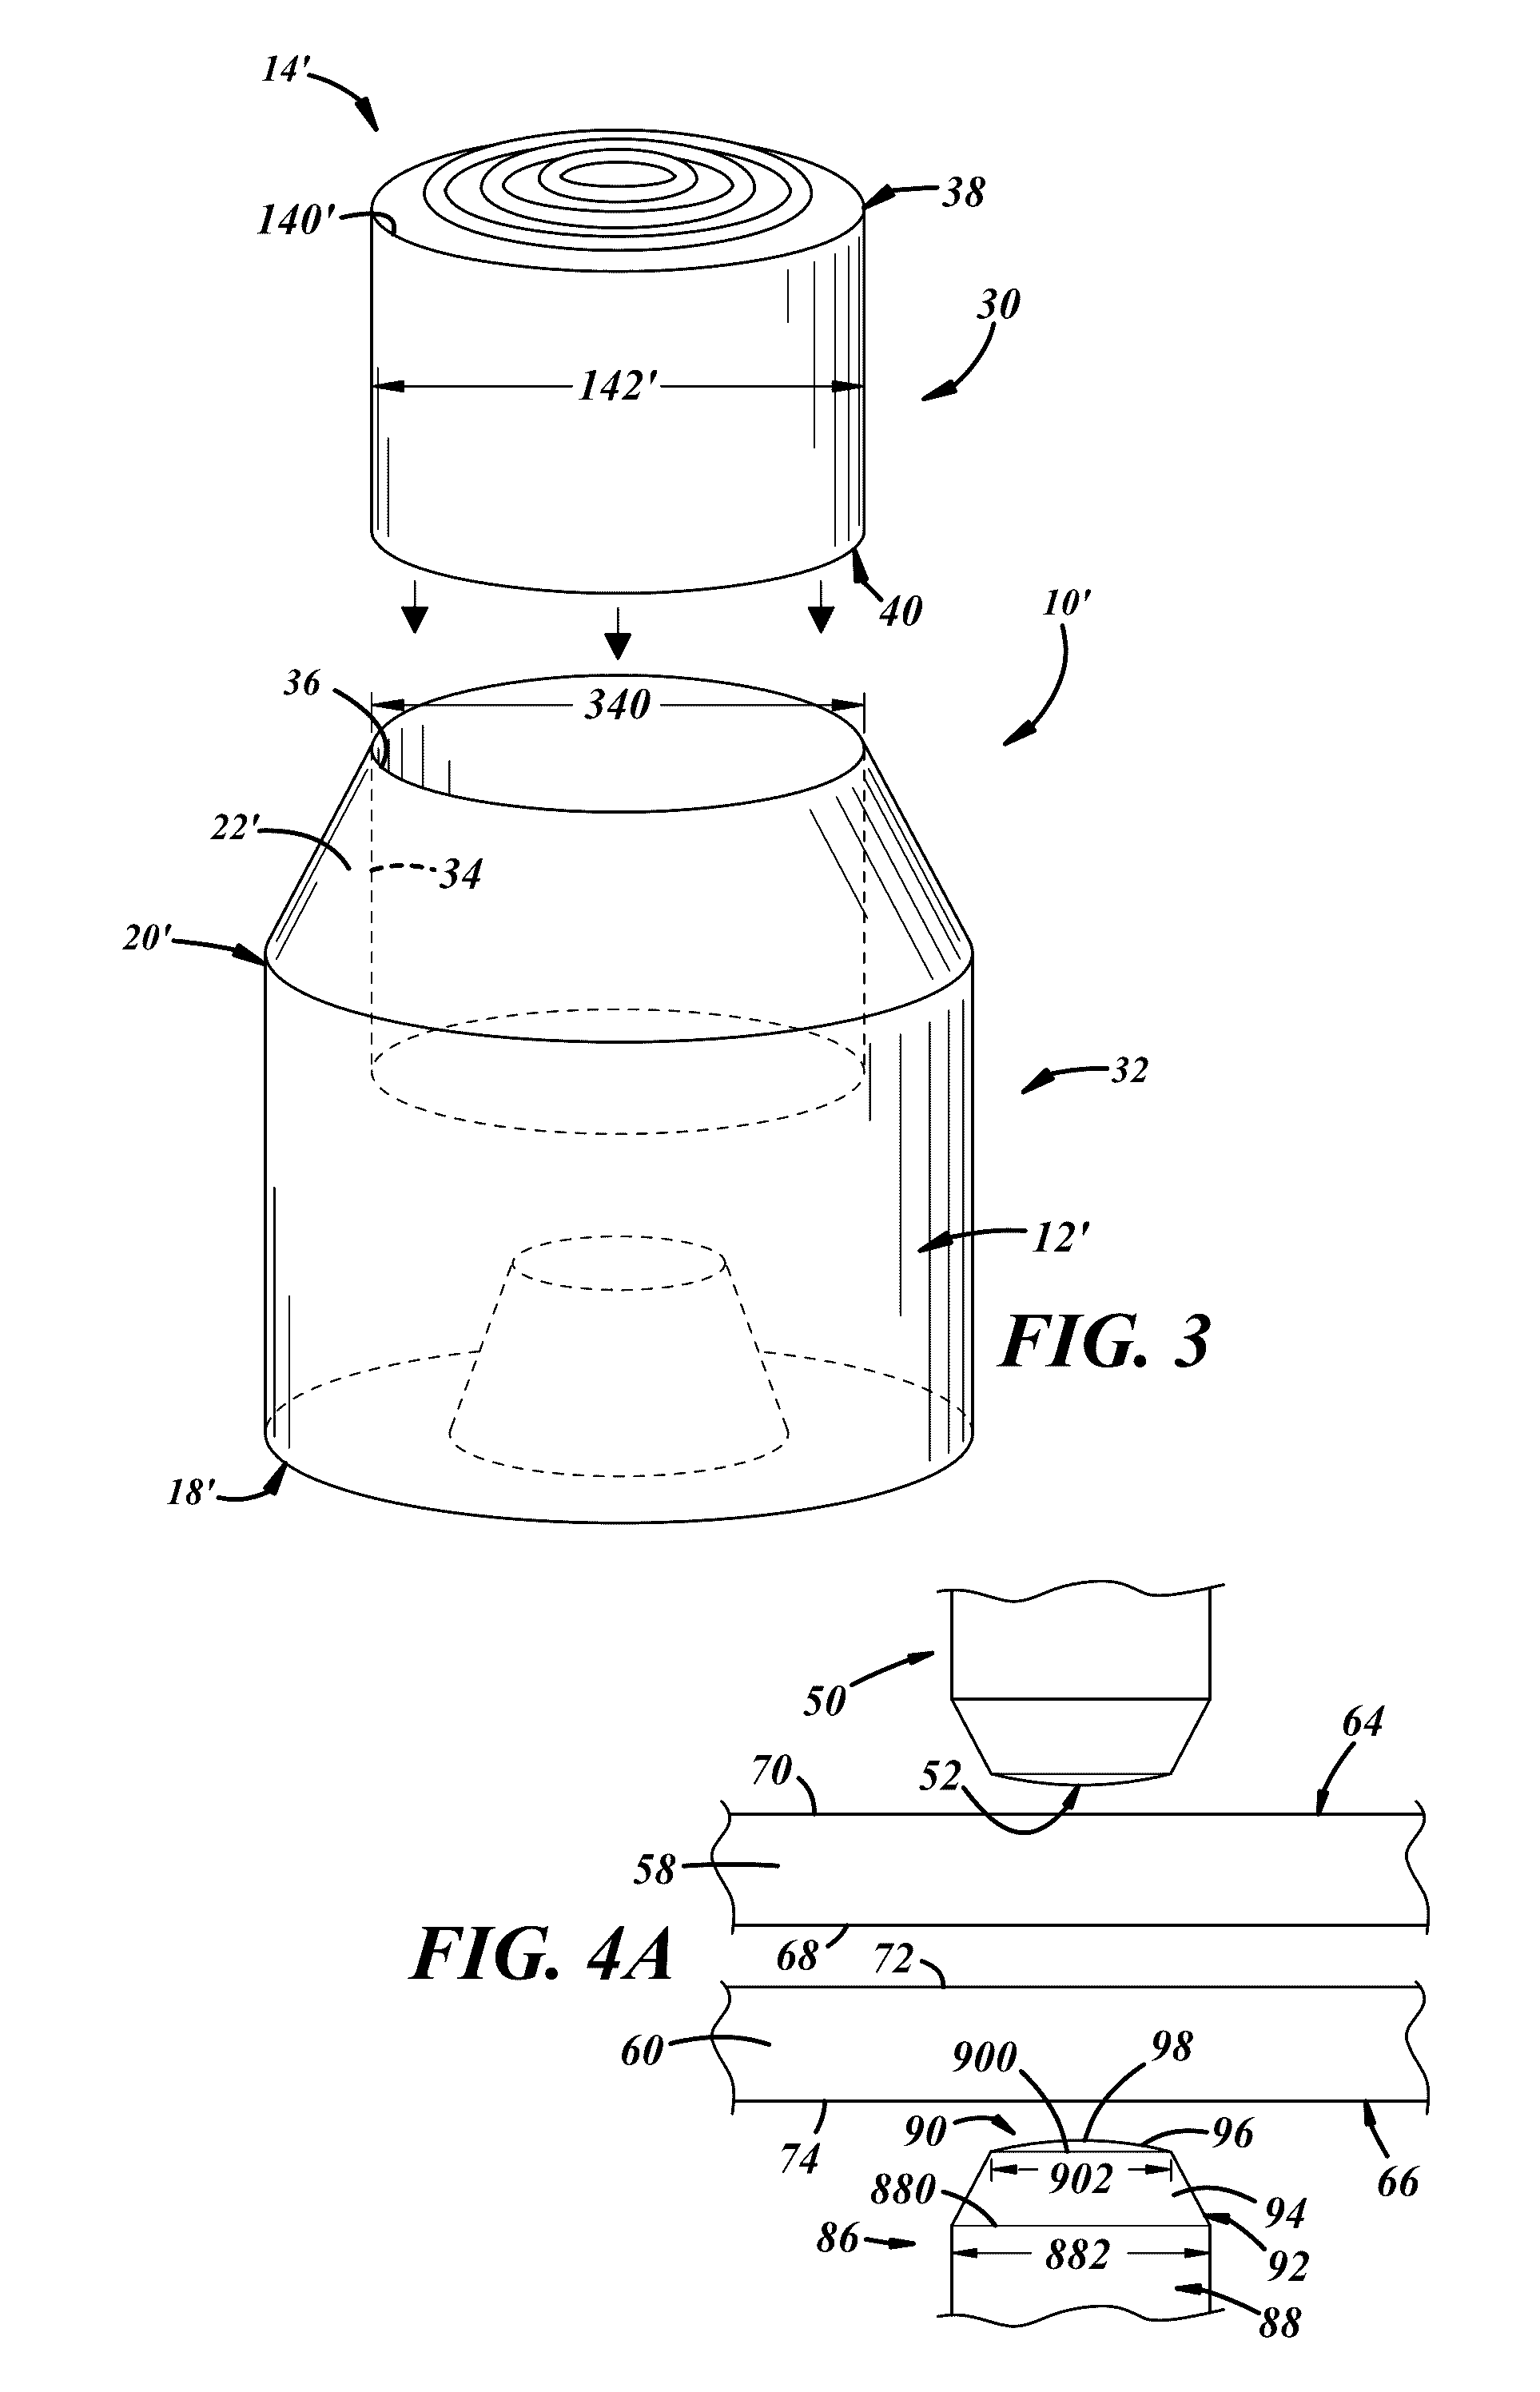 Resistive welding electrode and method for spot welding steel and aluminum alloy workpieces with the resistive welding electrode